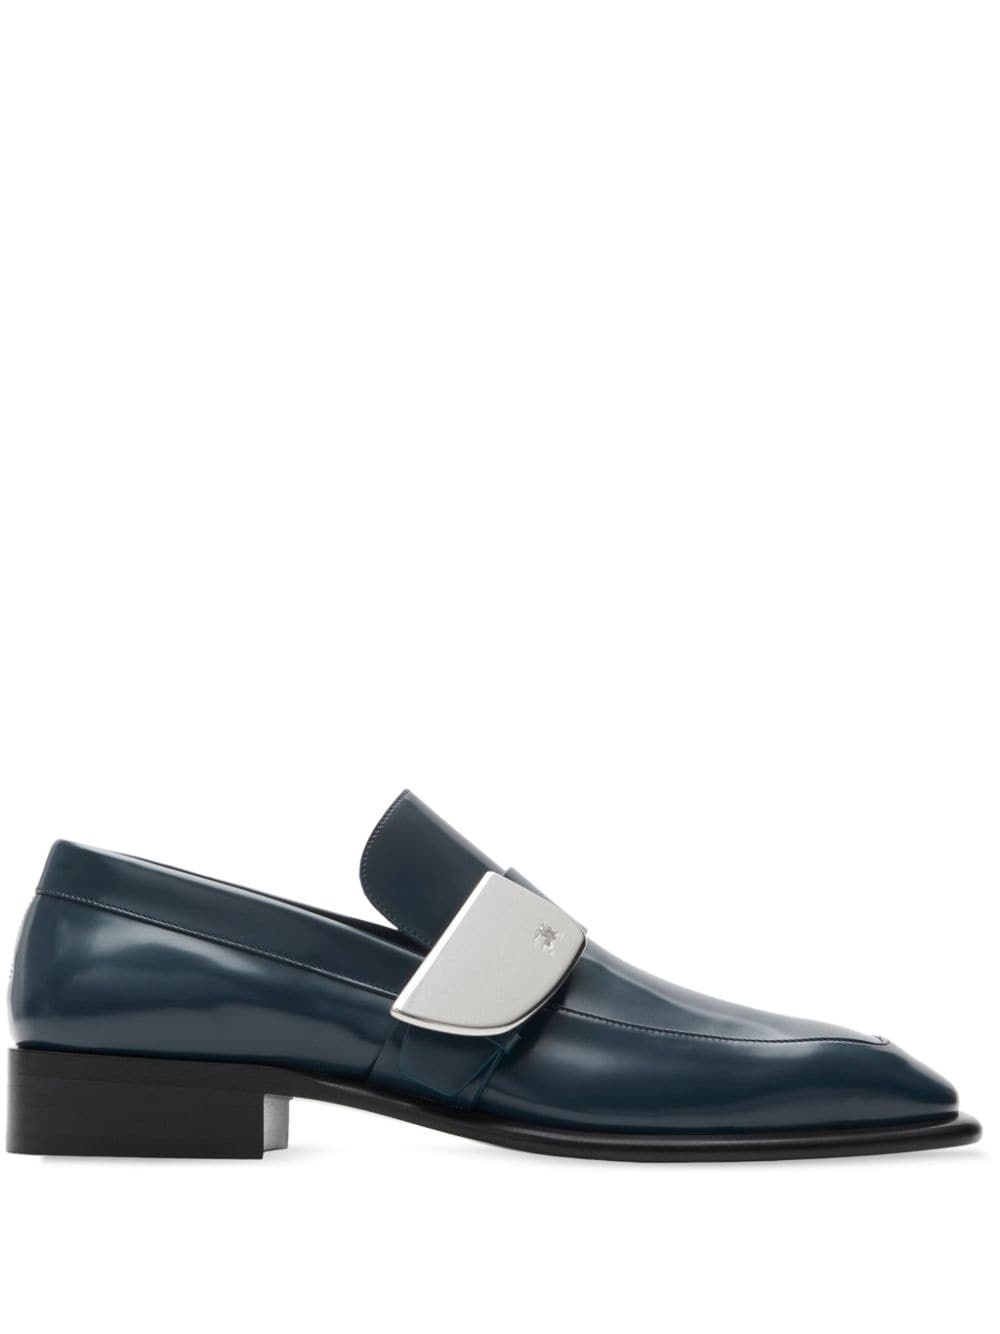 Shield leather loafers - 1